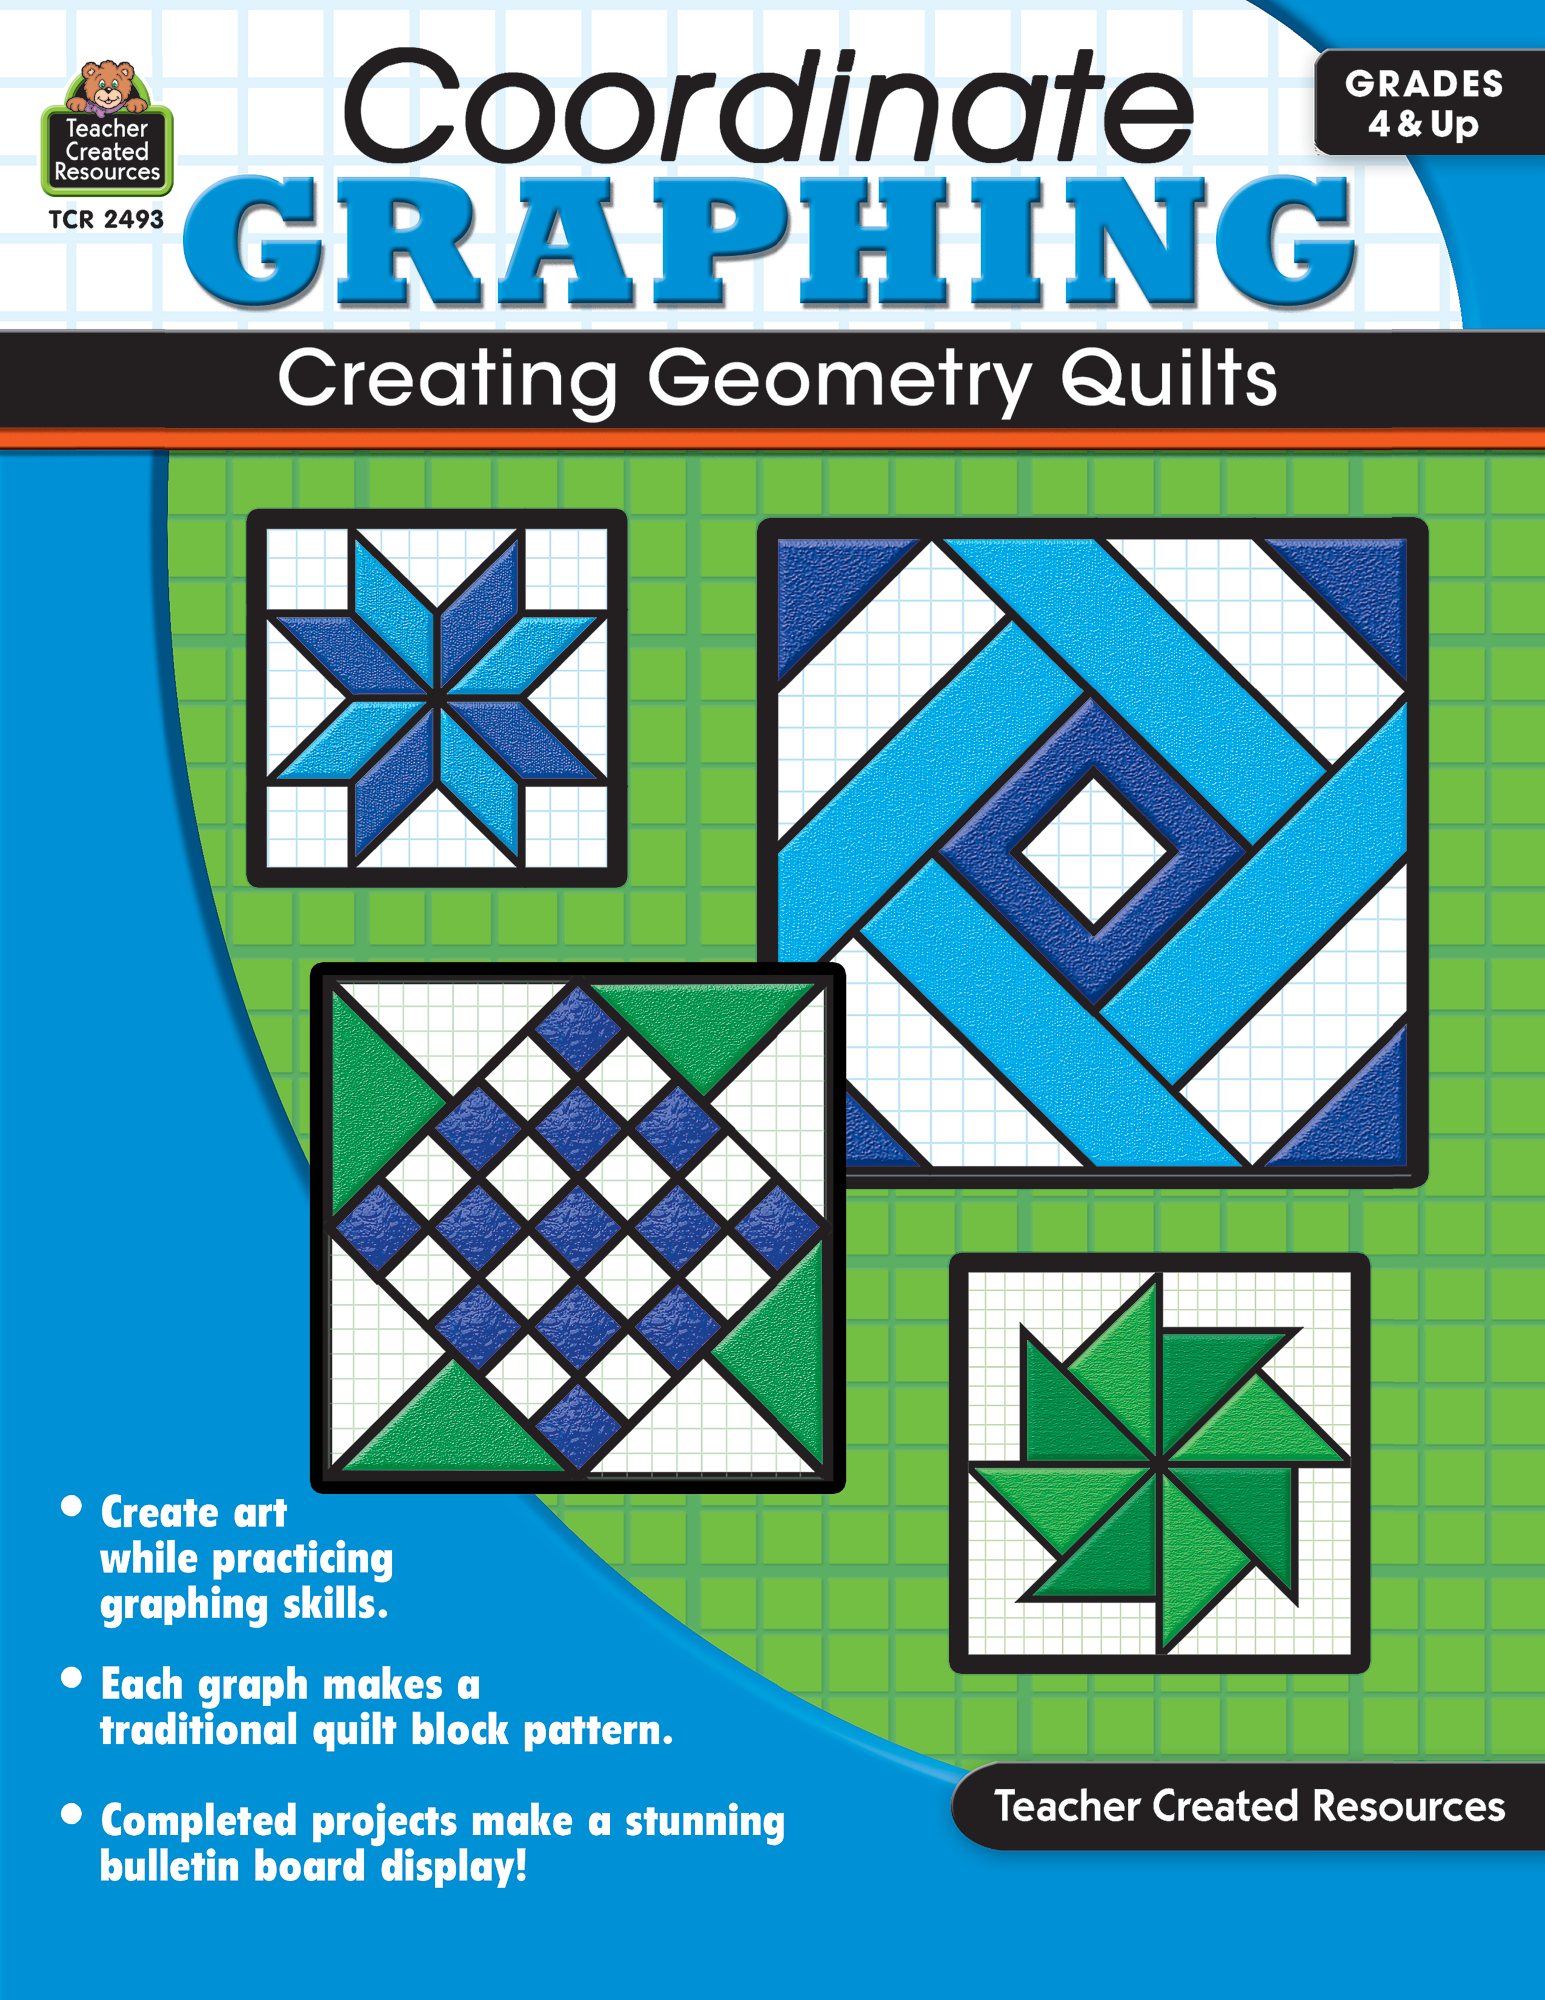 coordinate graphing creating geometry quilts grade 4 up tcr2493